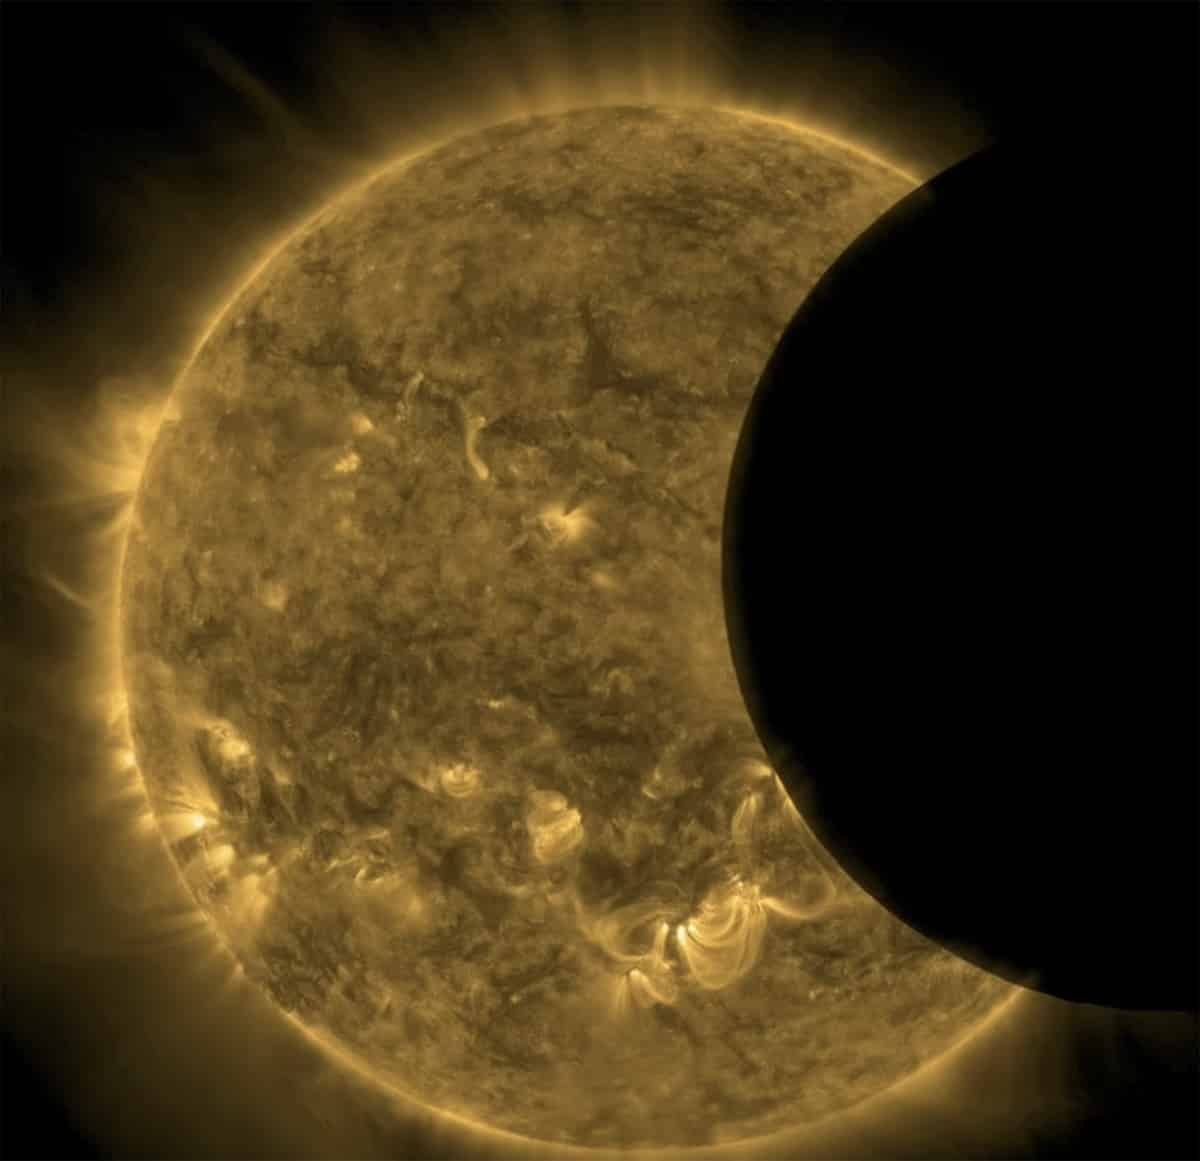 NASA Sun Mission Photographs Fiery Solar Eclipse From Space